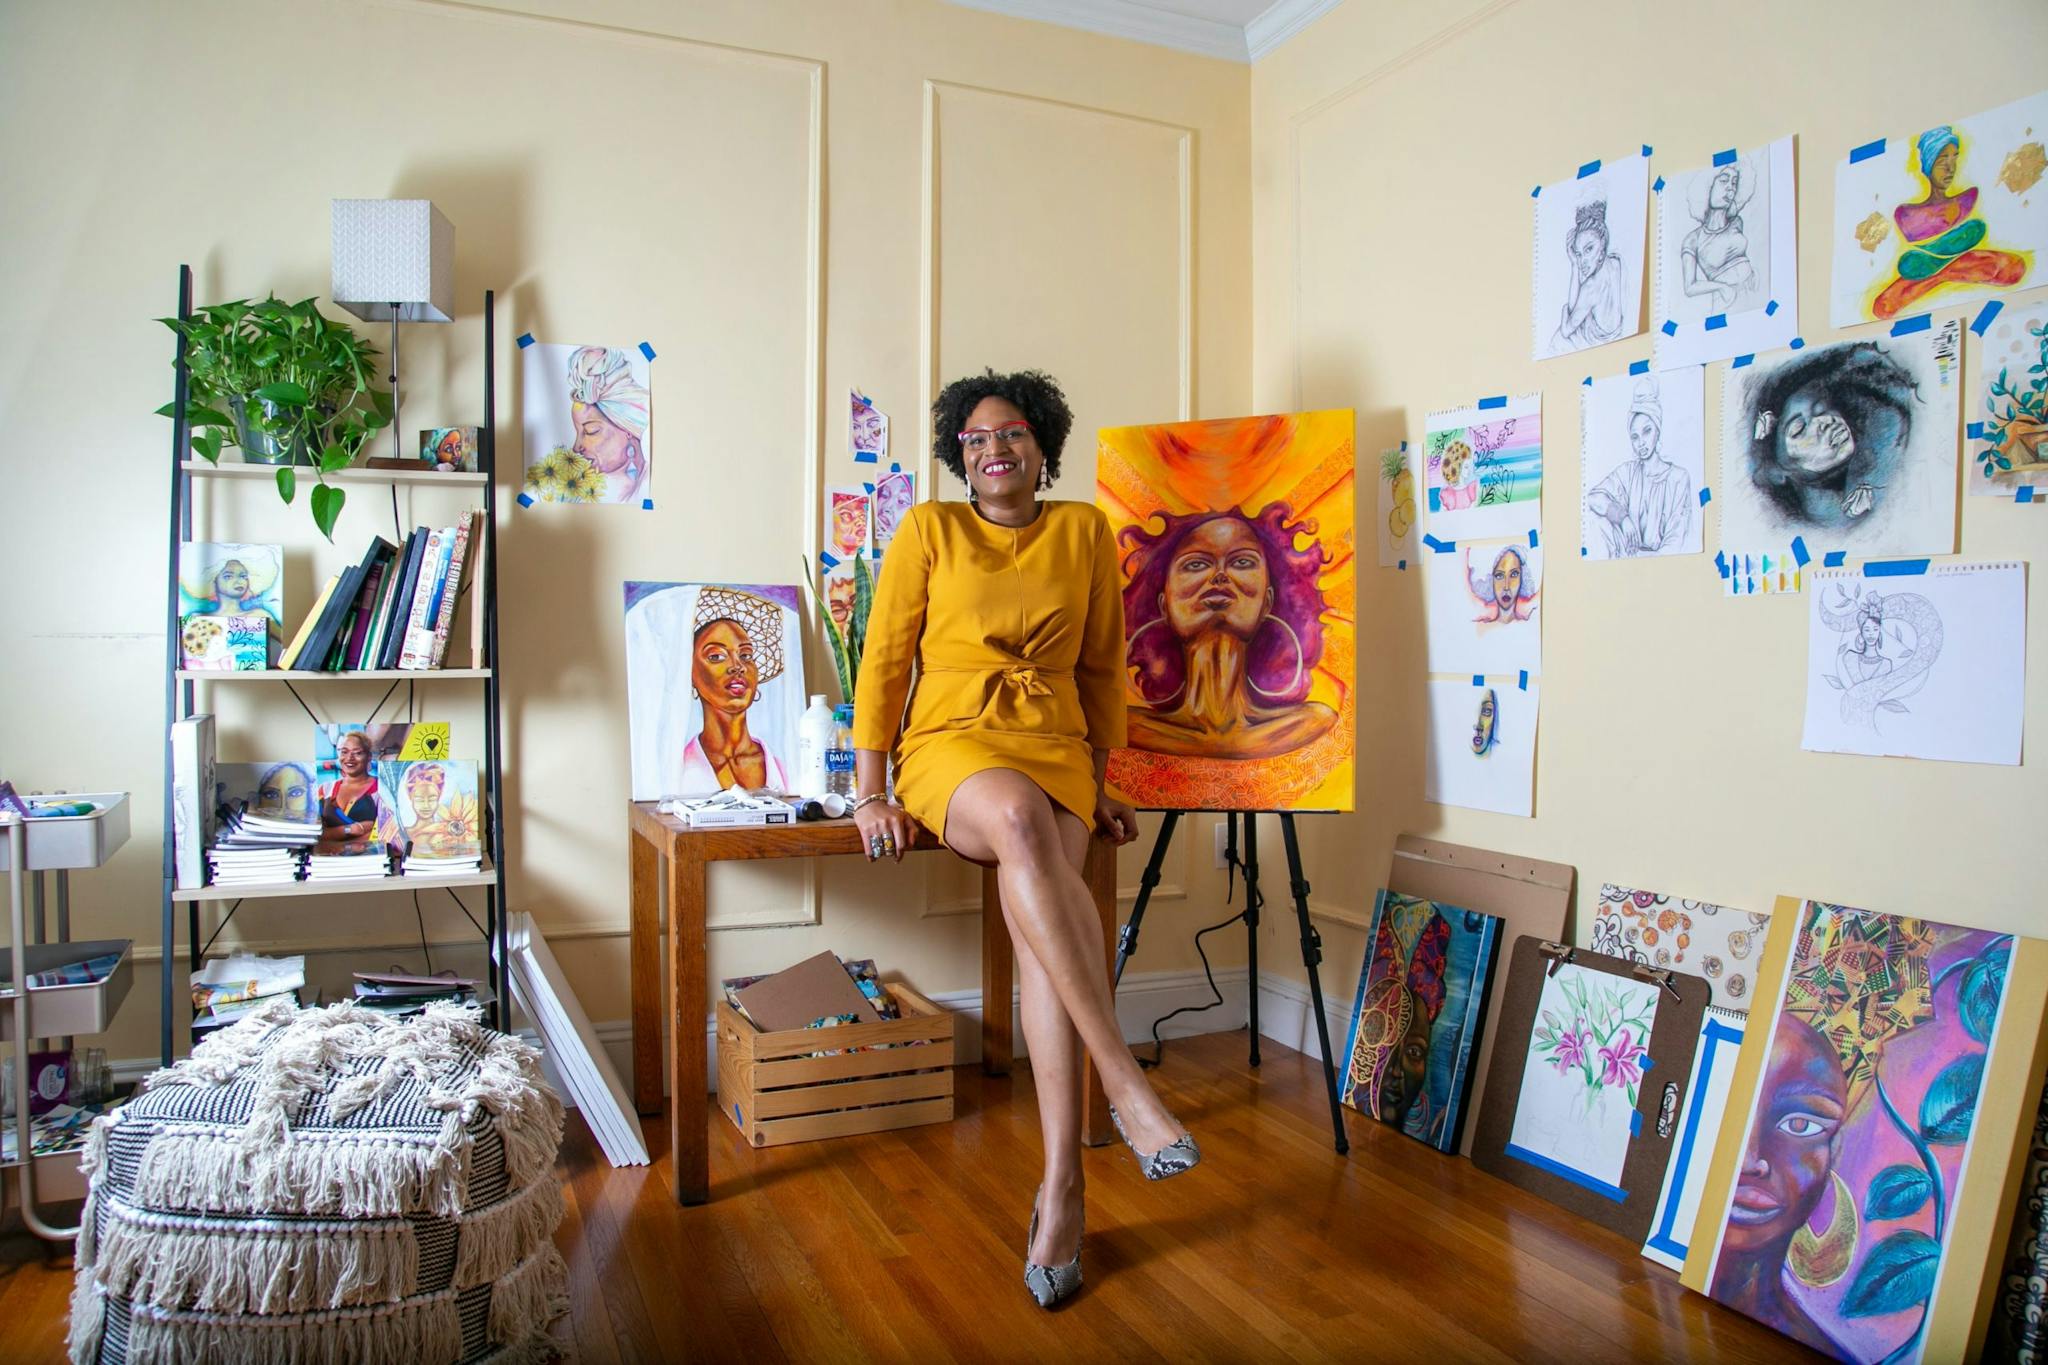 Ayana Mack is at her home studio, seated beside two paintings of women's faces, while a collection of artwork appears on the wall to the right.